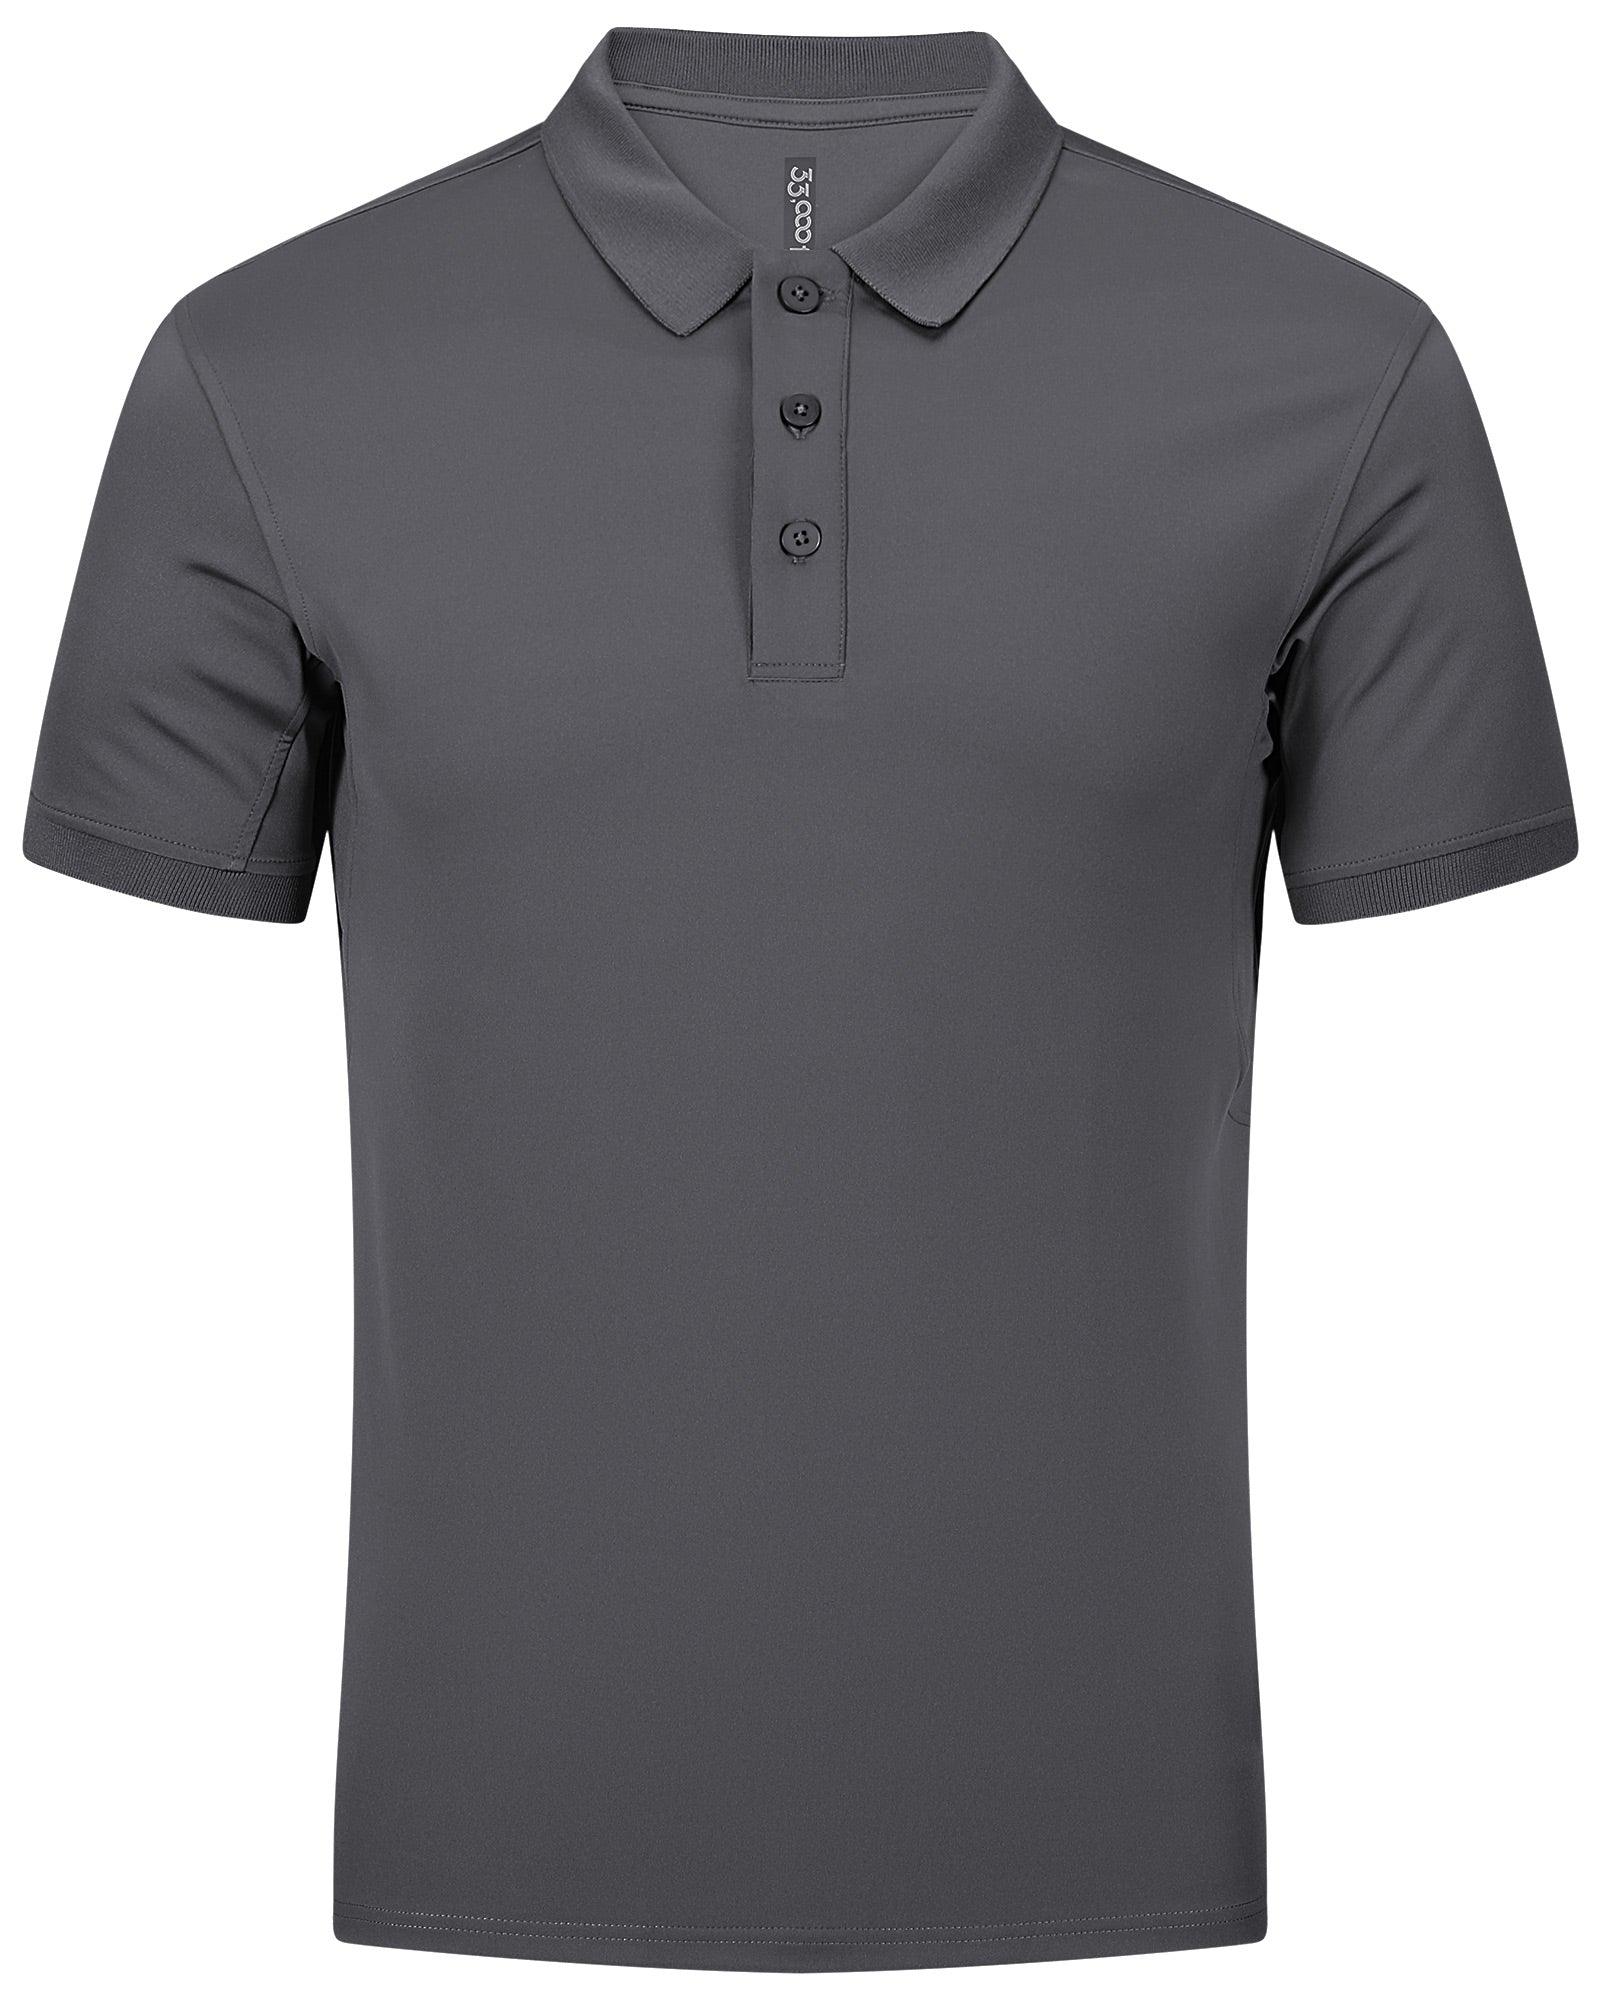 Men's UPF50+ Golf Polo Short Sleeve Collared Quick Dry T-Shirt – 33,000ft